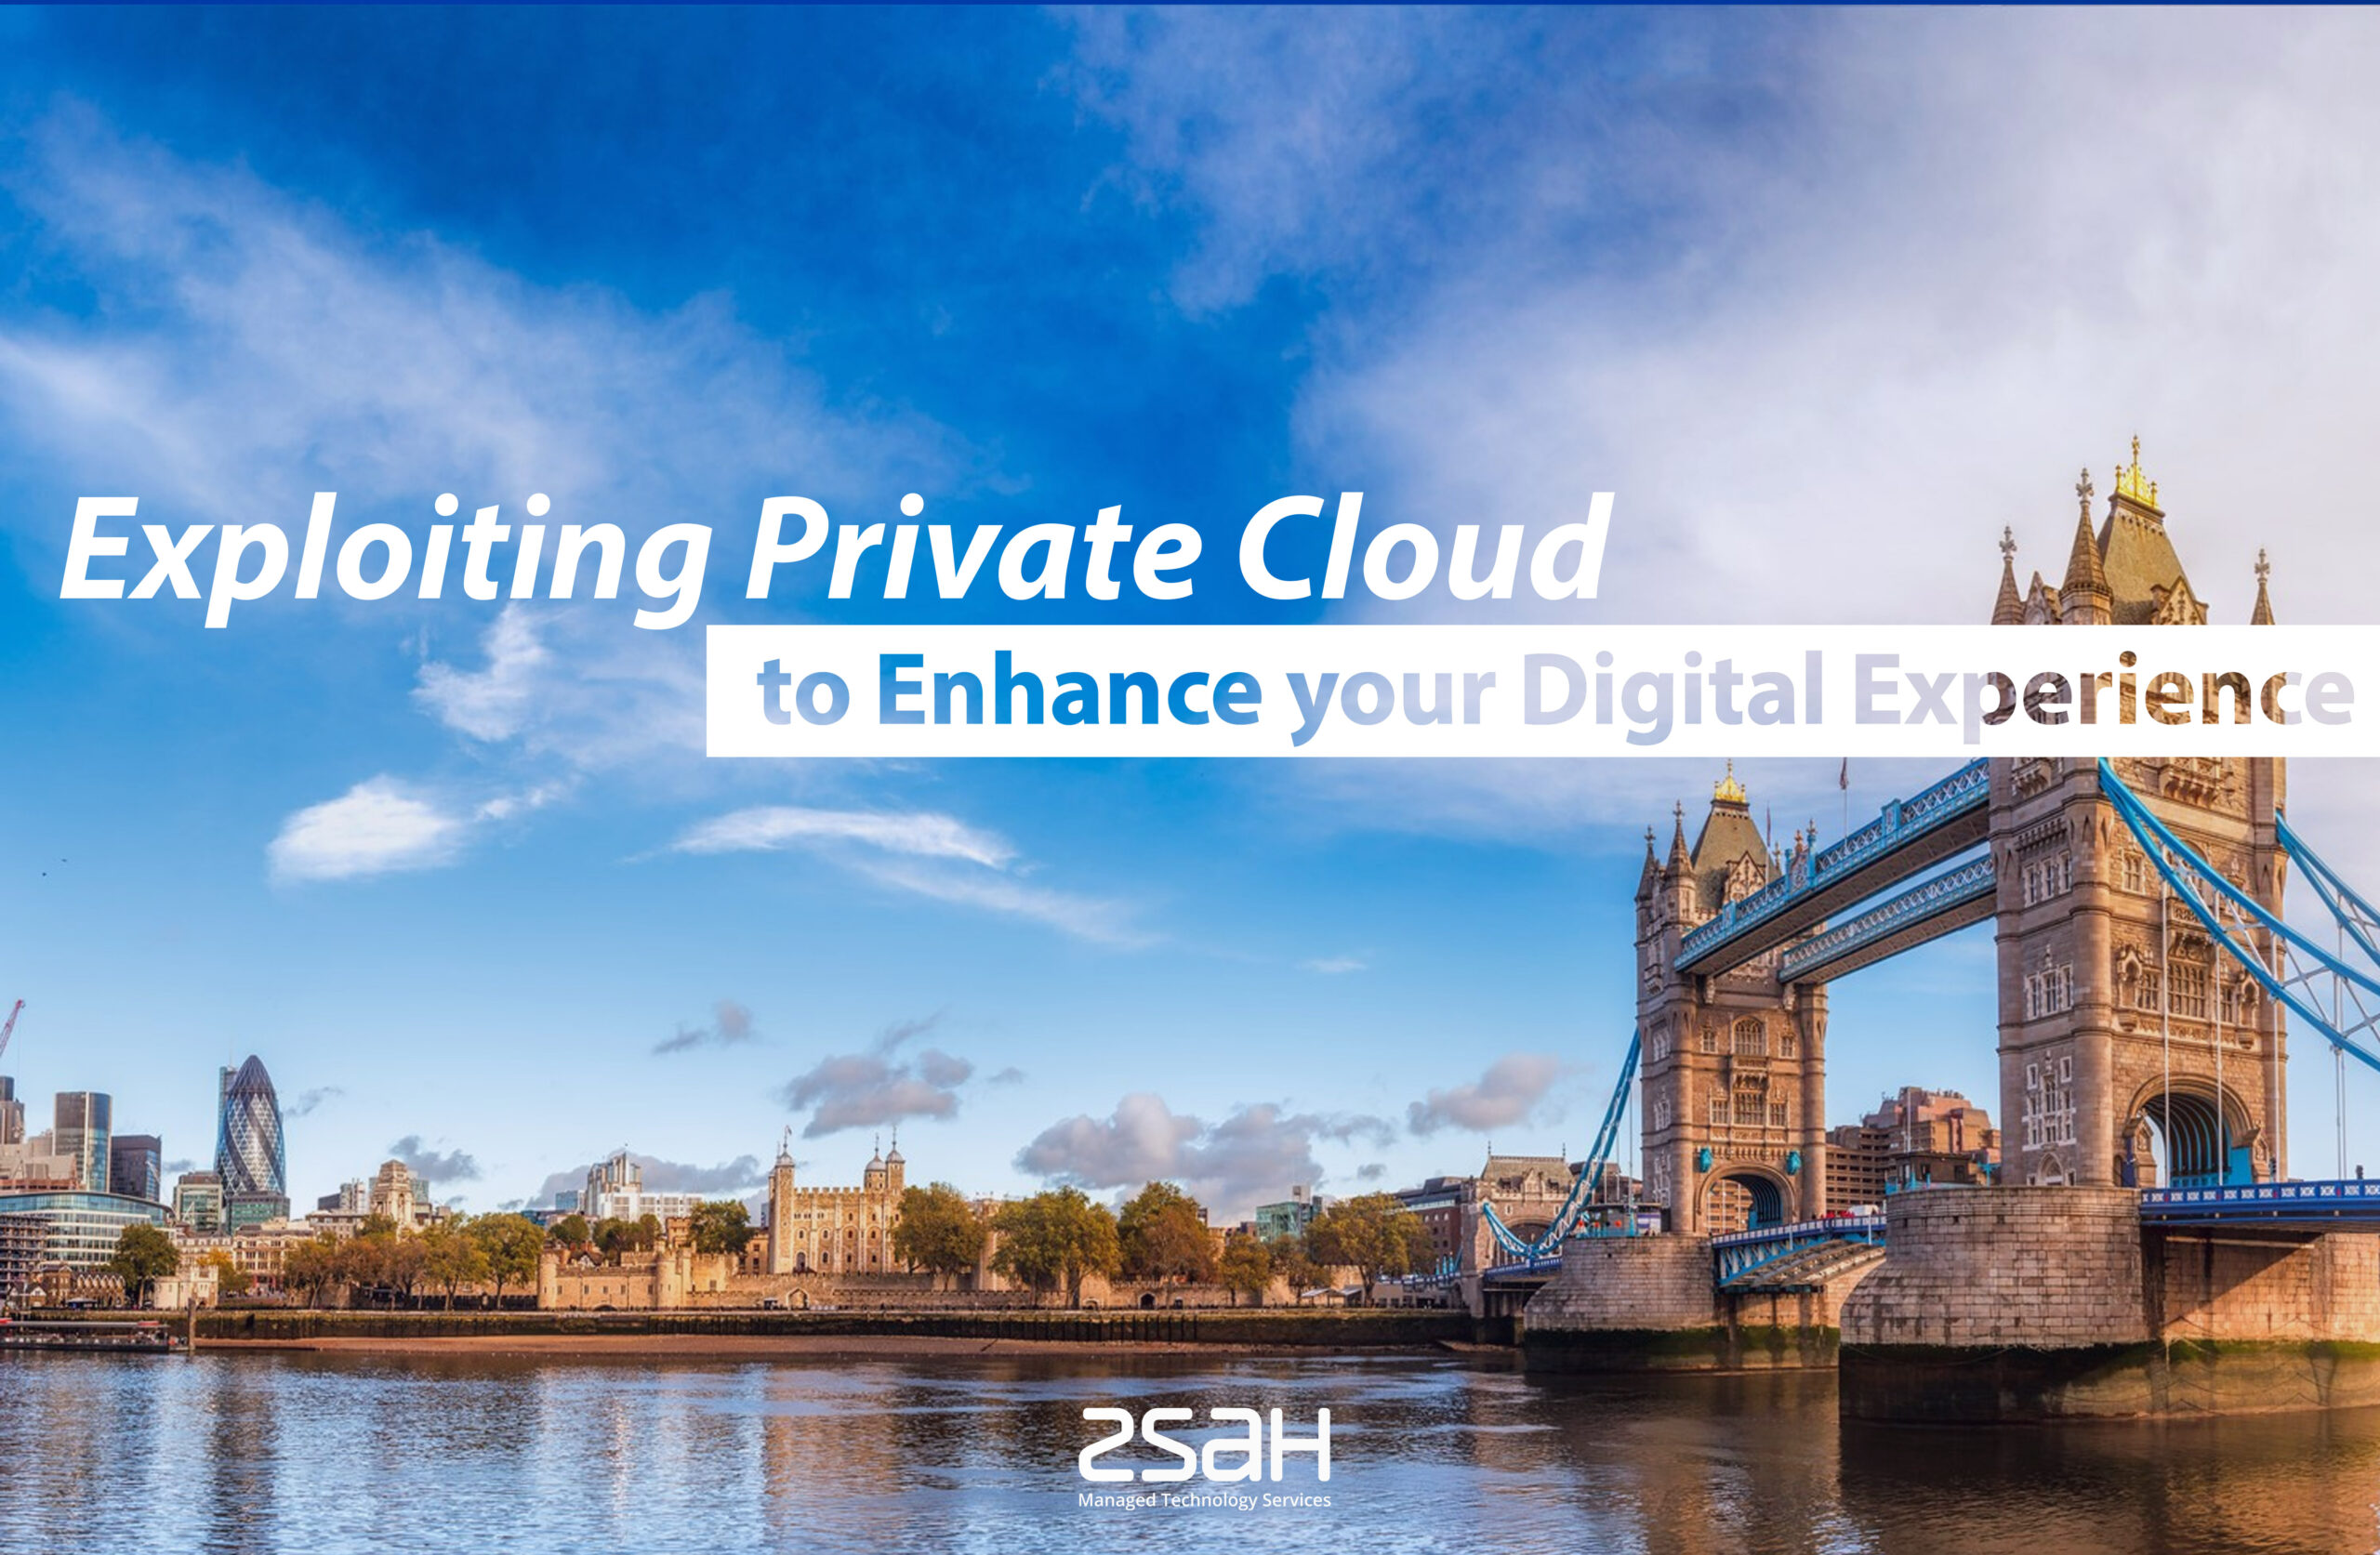 Exploiting Private Cloud to Enhance Your Digital Experience - zsah